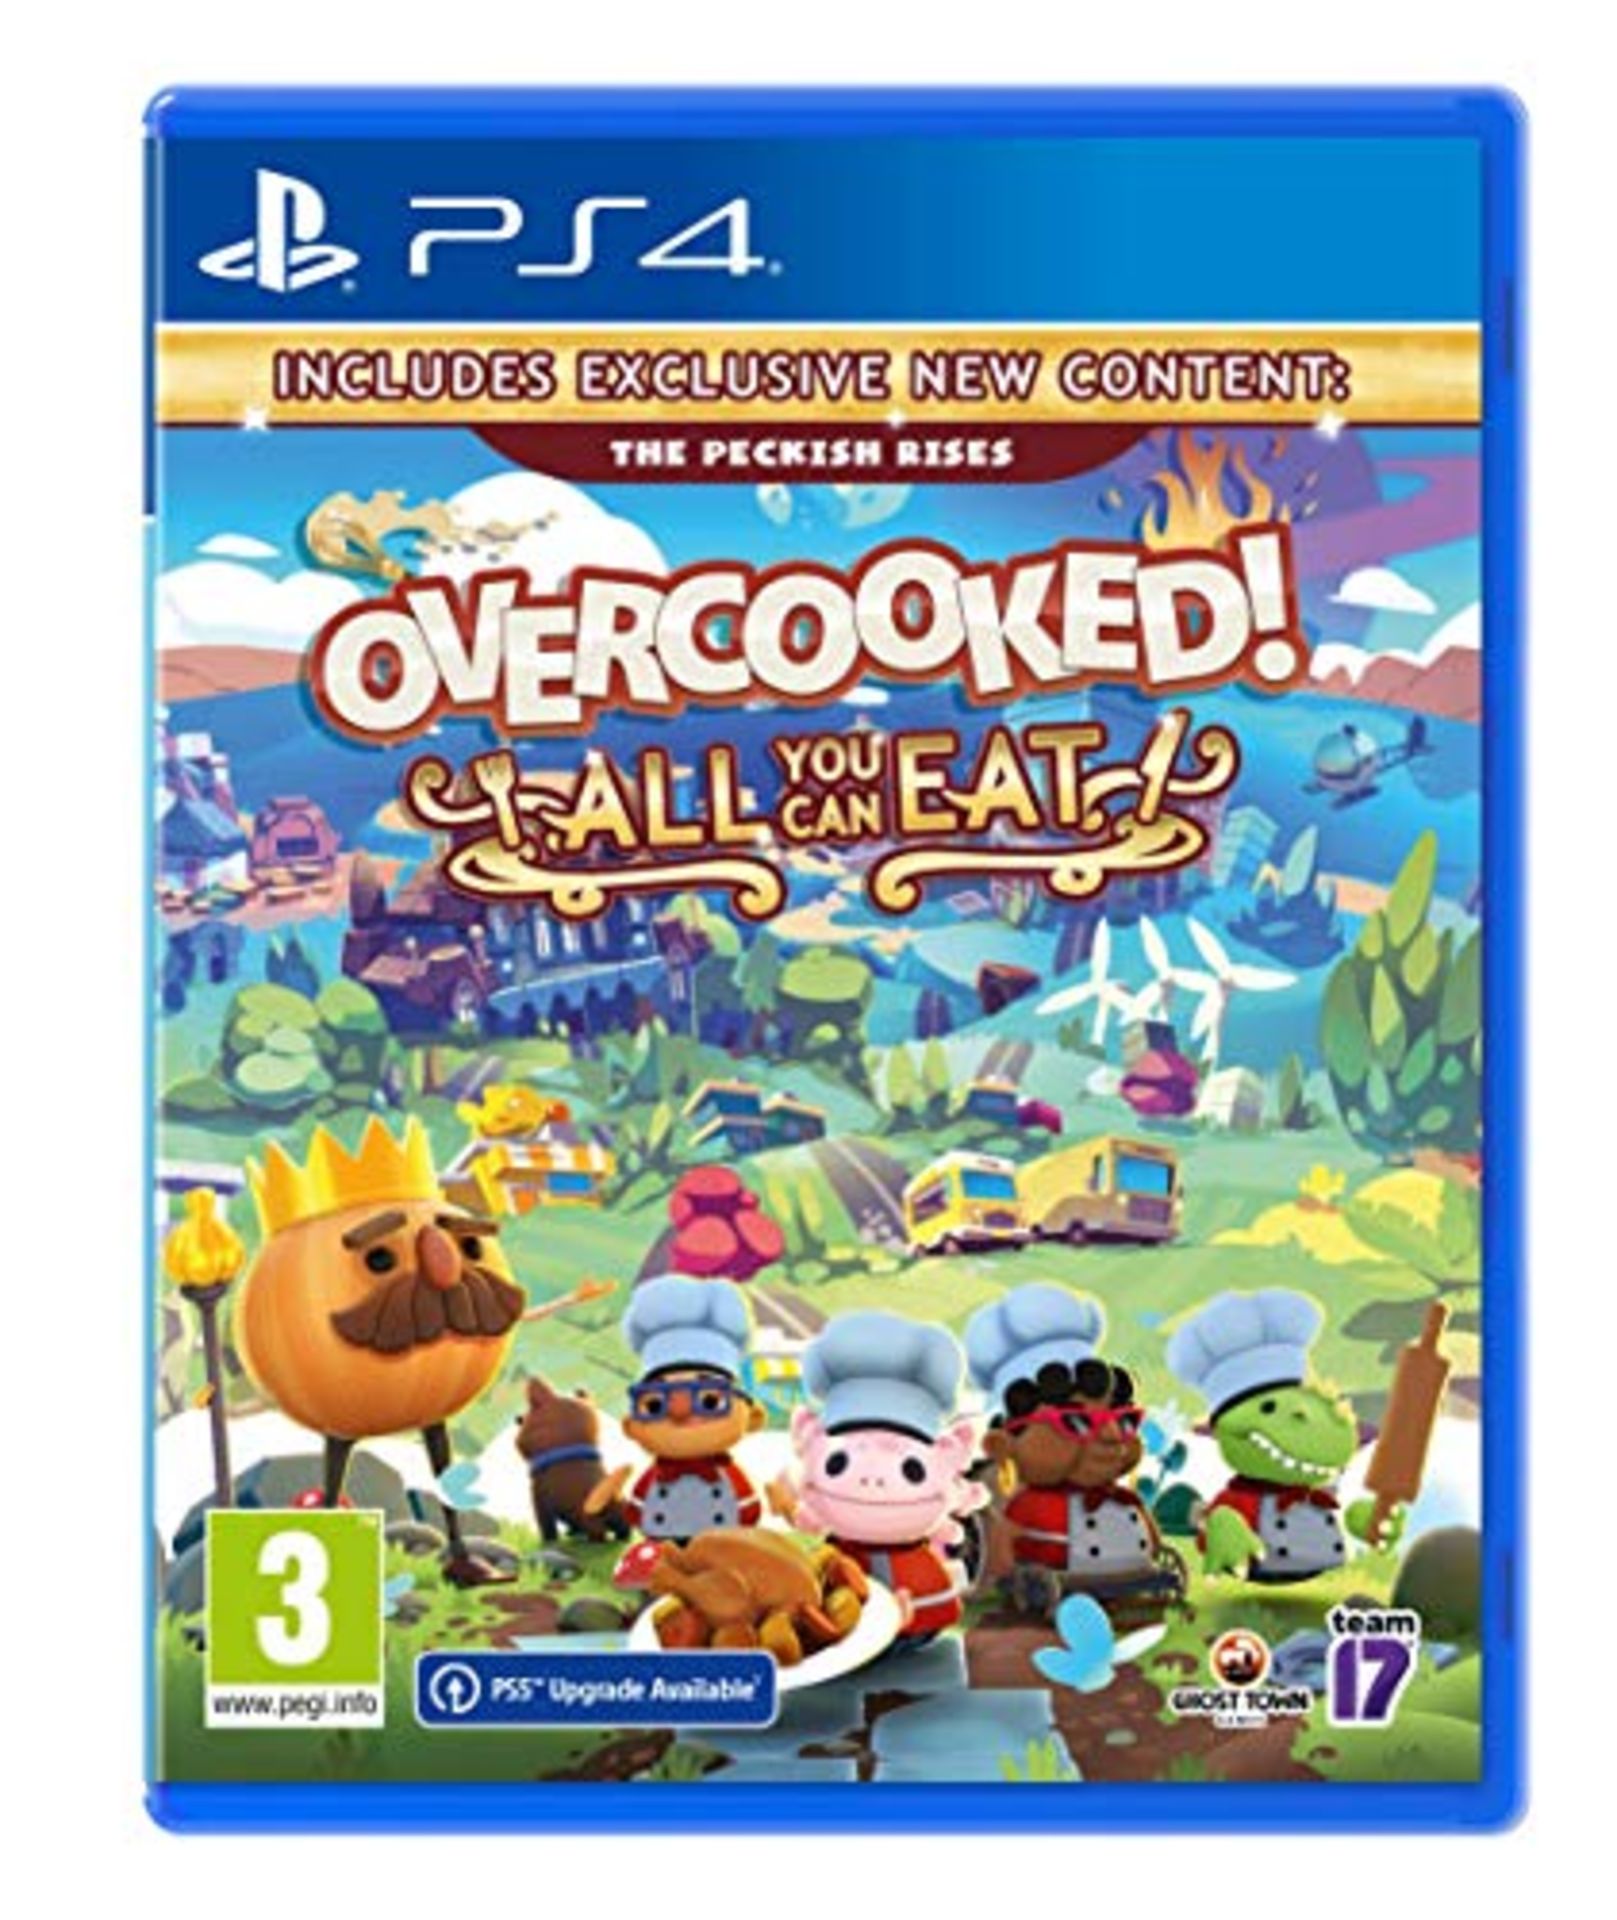 PS4 Overcooked: All You Can Eat - PlayStation 4 - Image 4 of 6